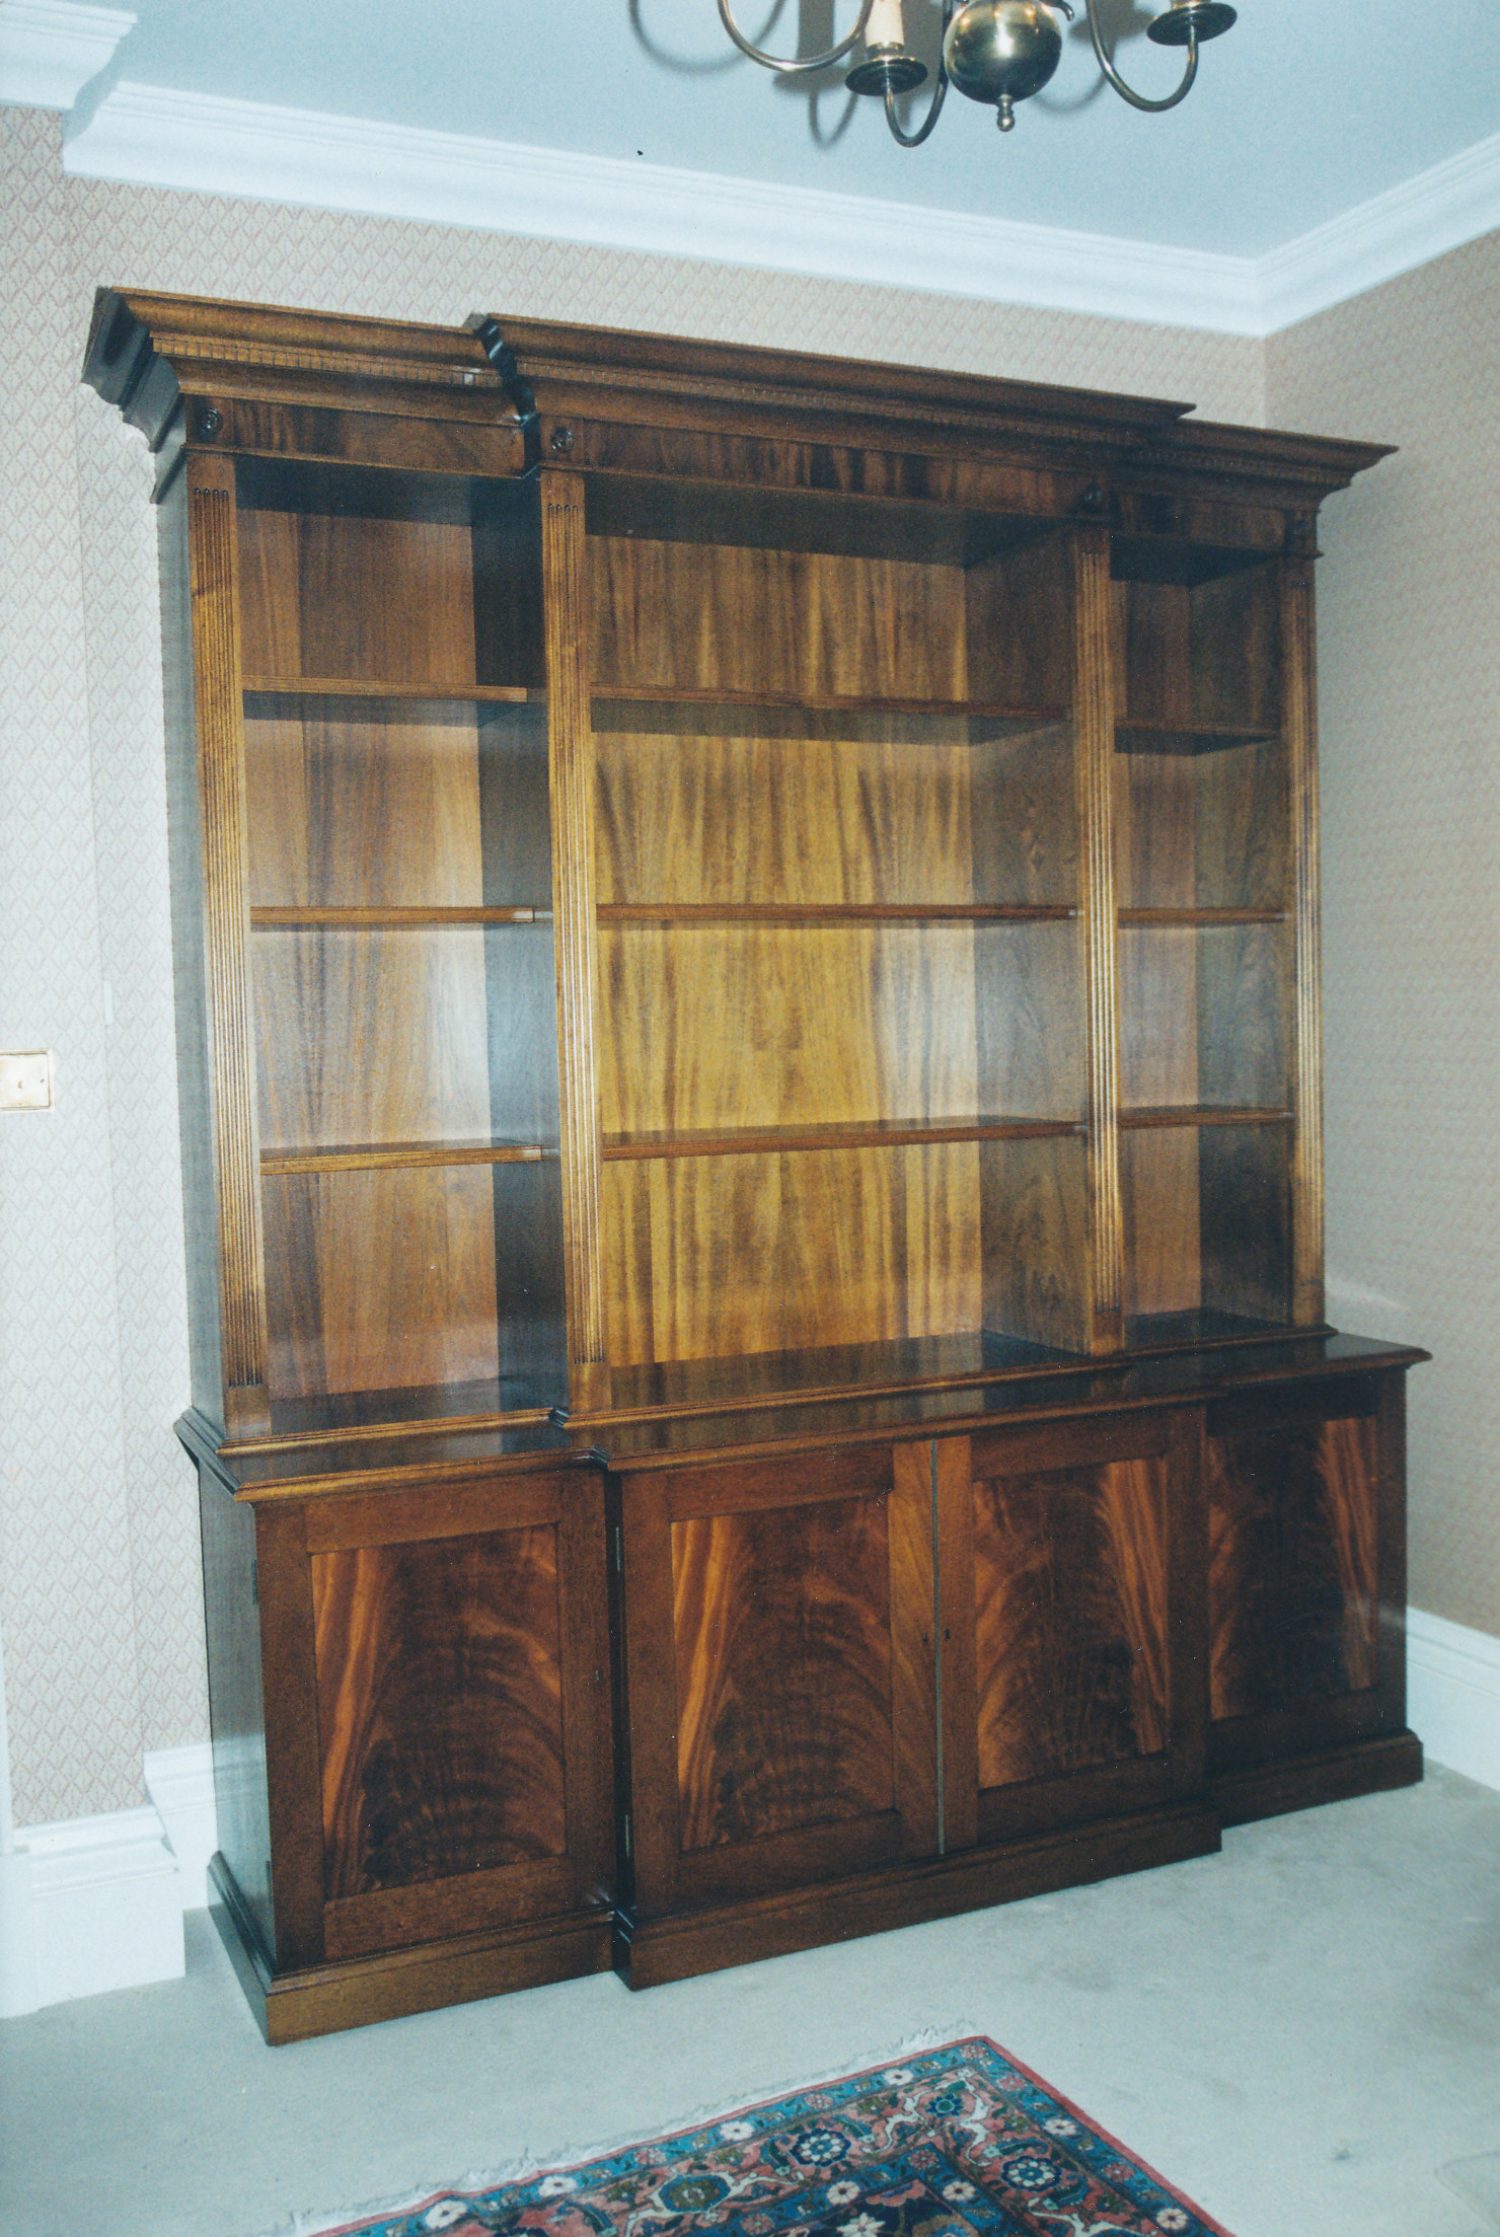 Mahogany Breakfront Bookcase with Cupboards Below